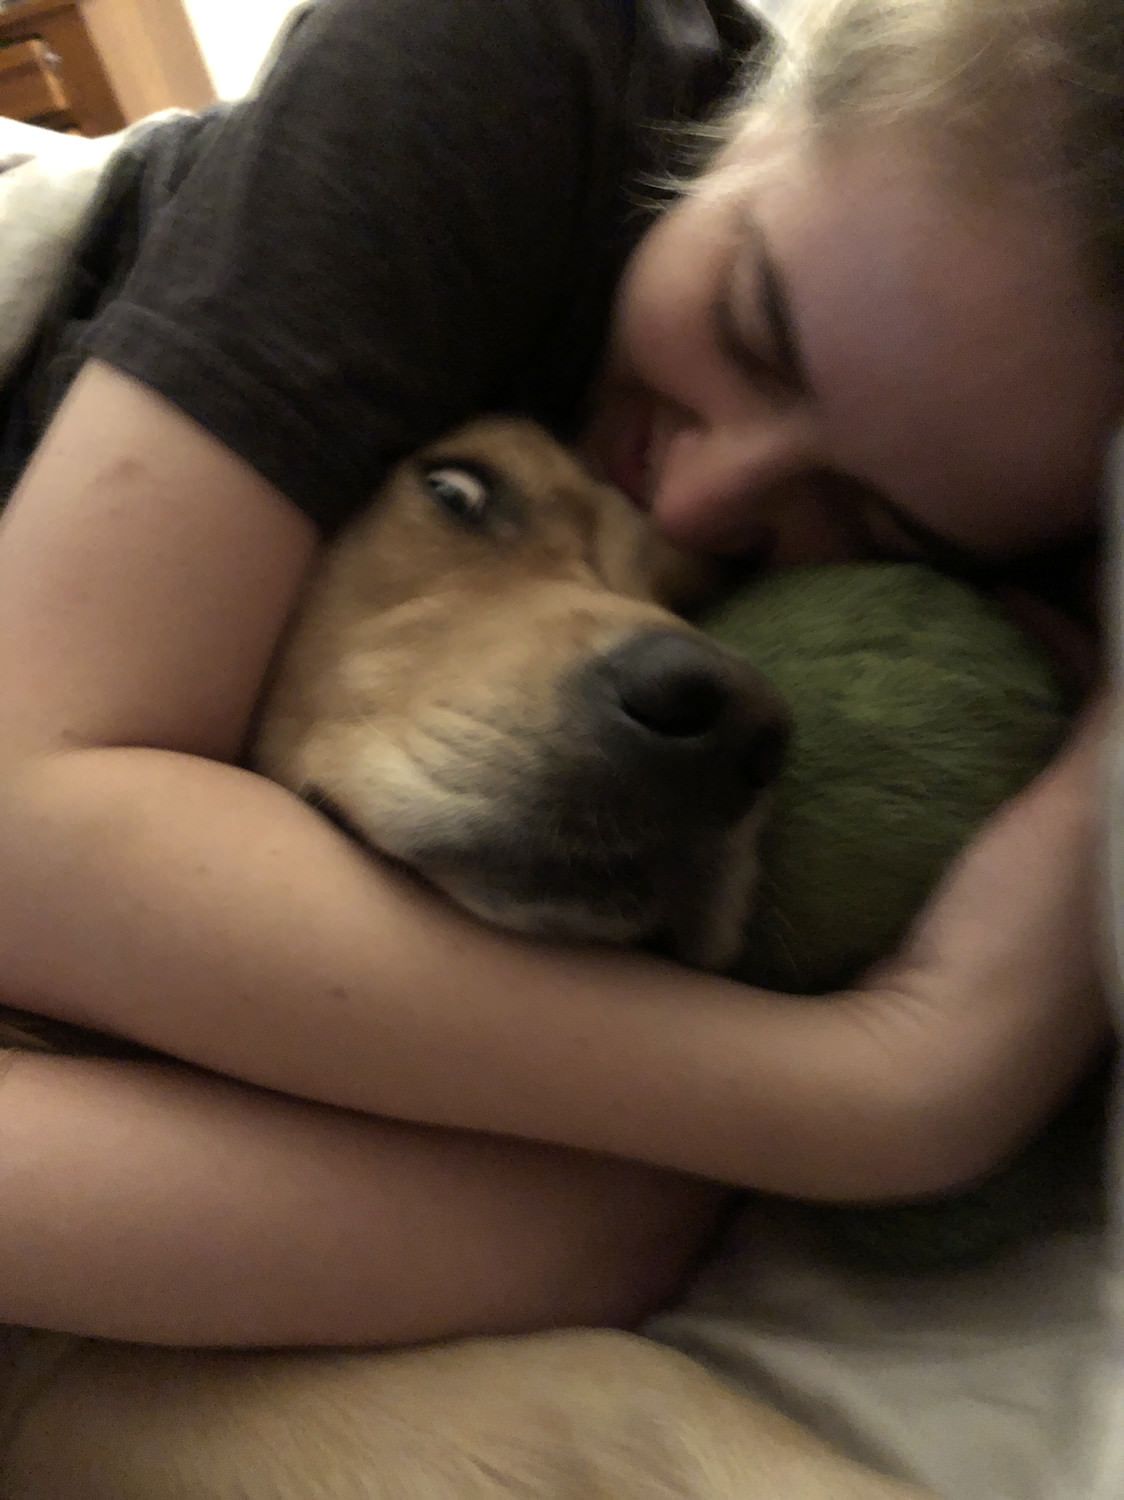 My wife came home drunk wanting cuddles...